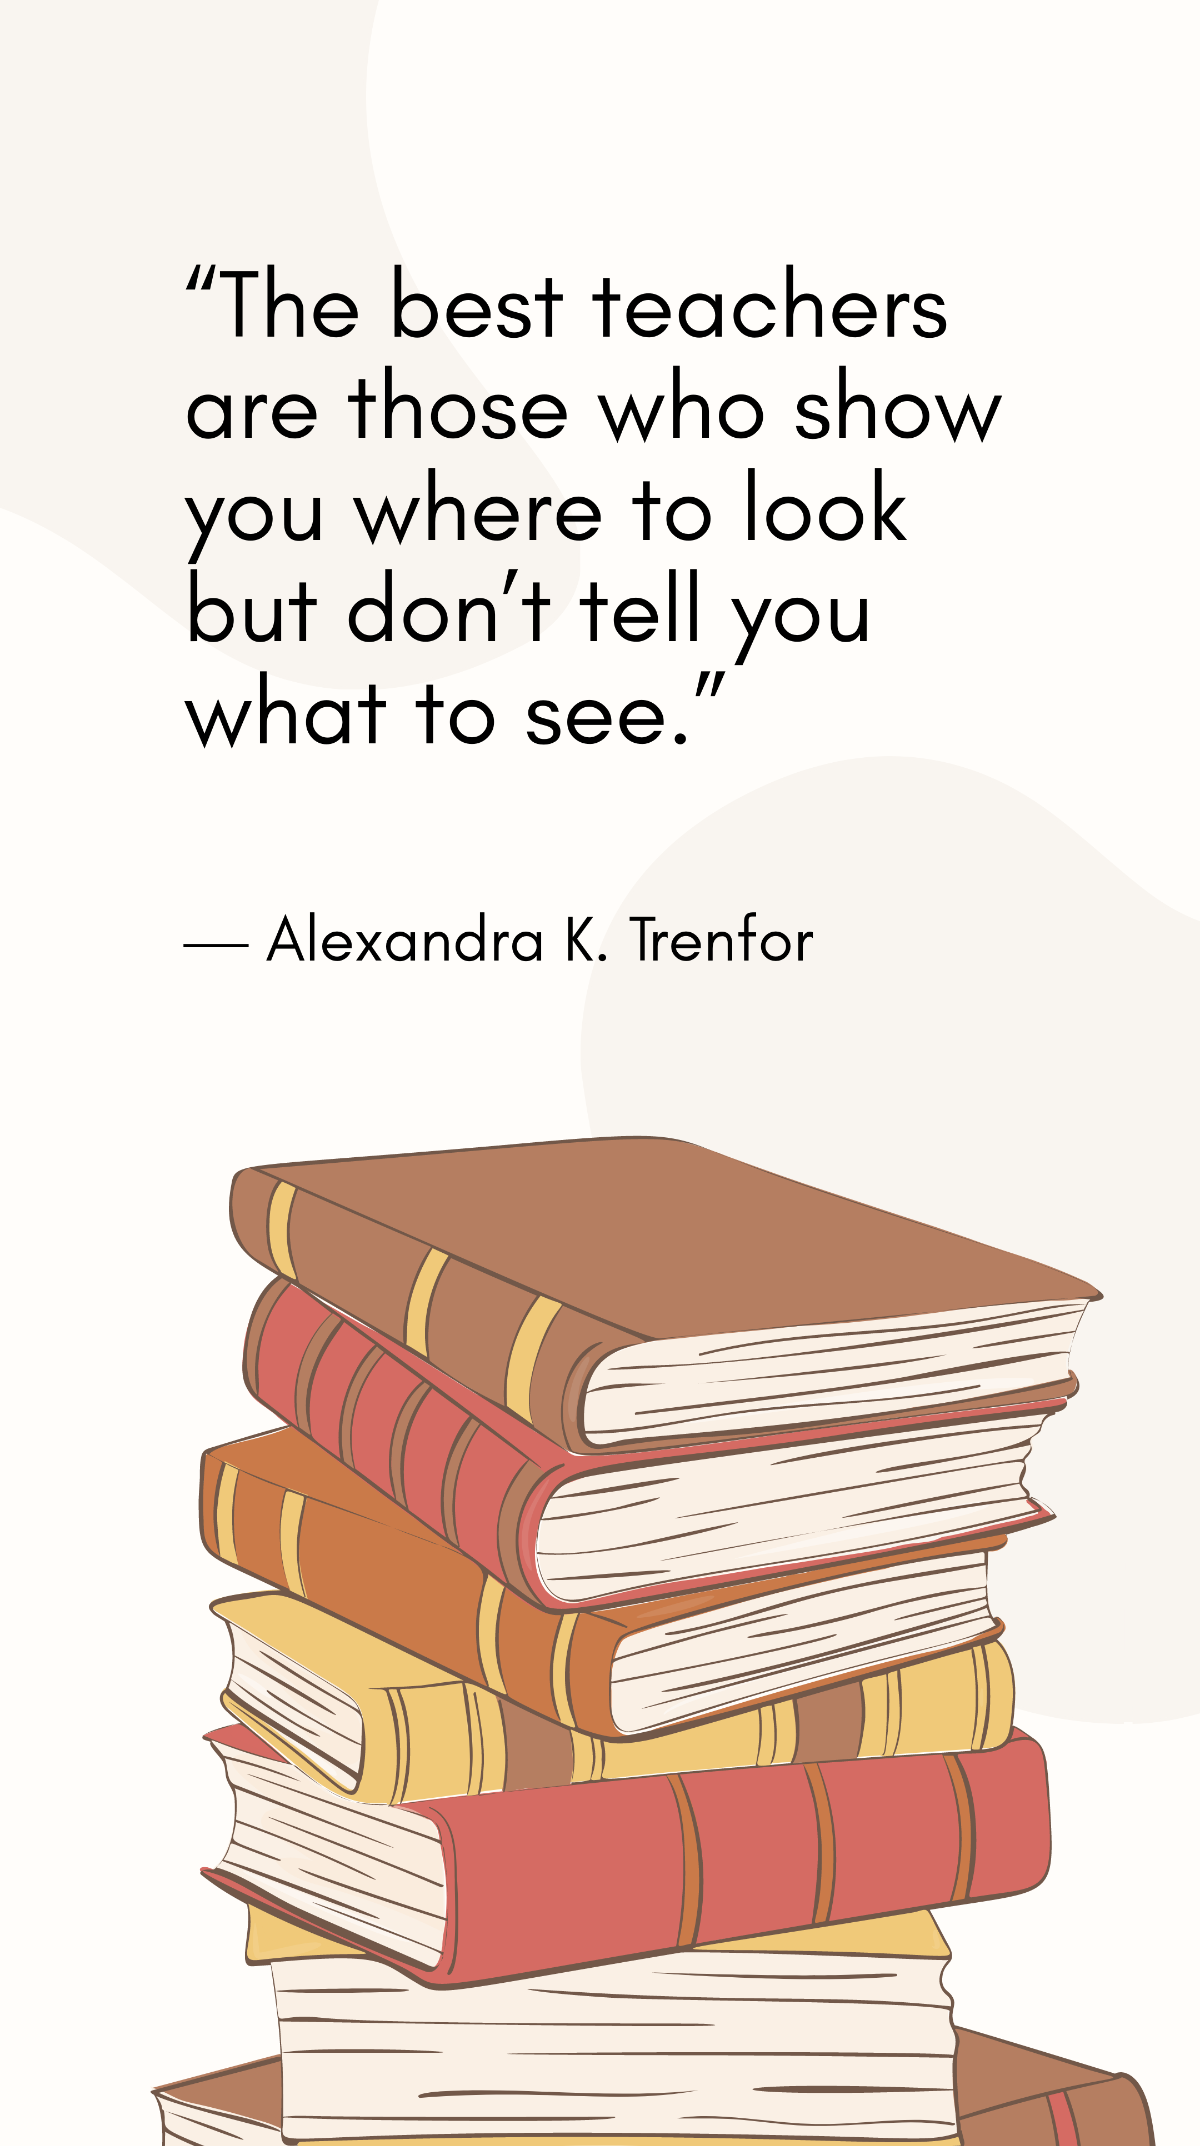 Alexandra K. Trenfor - The best teachers are those who show you where to look but don’t tell you what to see. Template